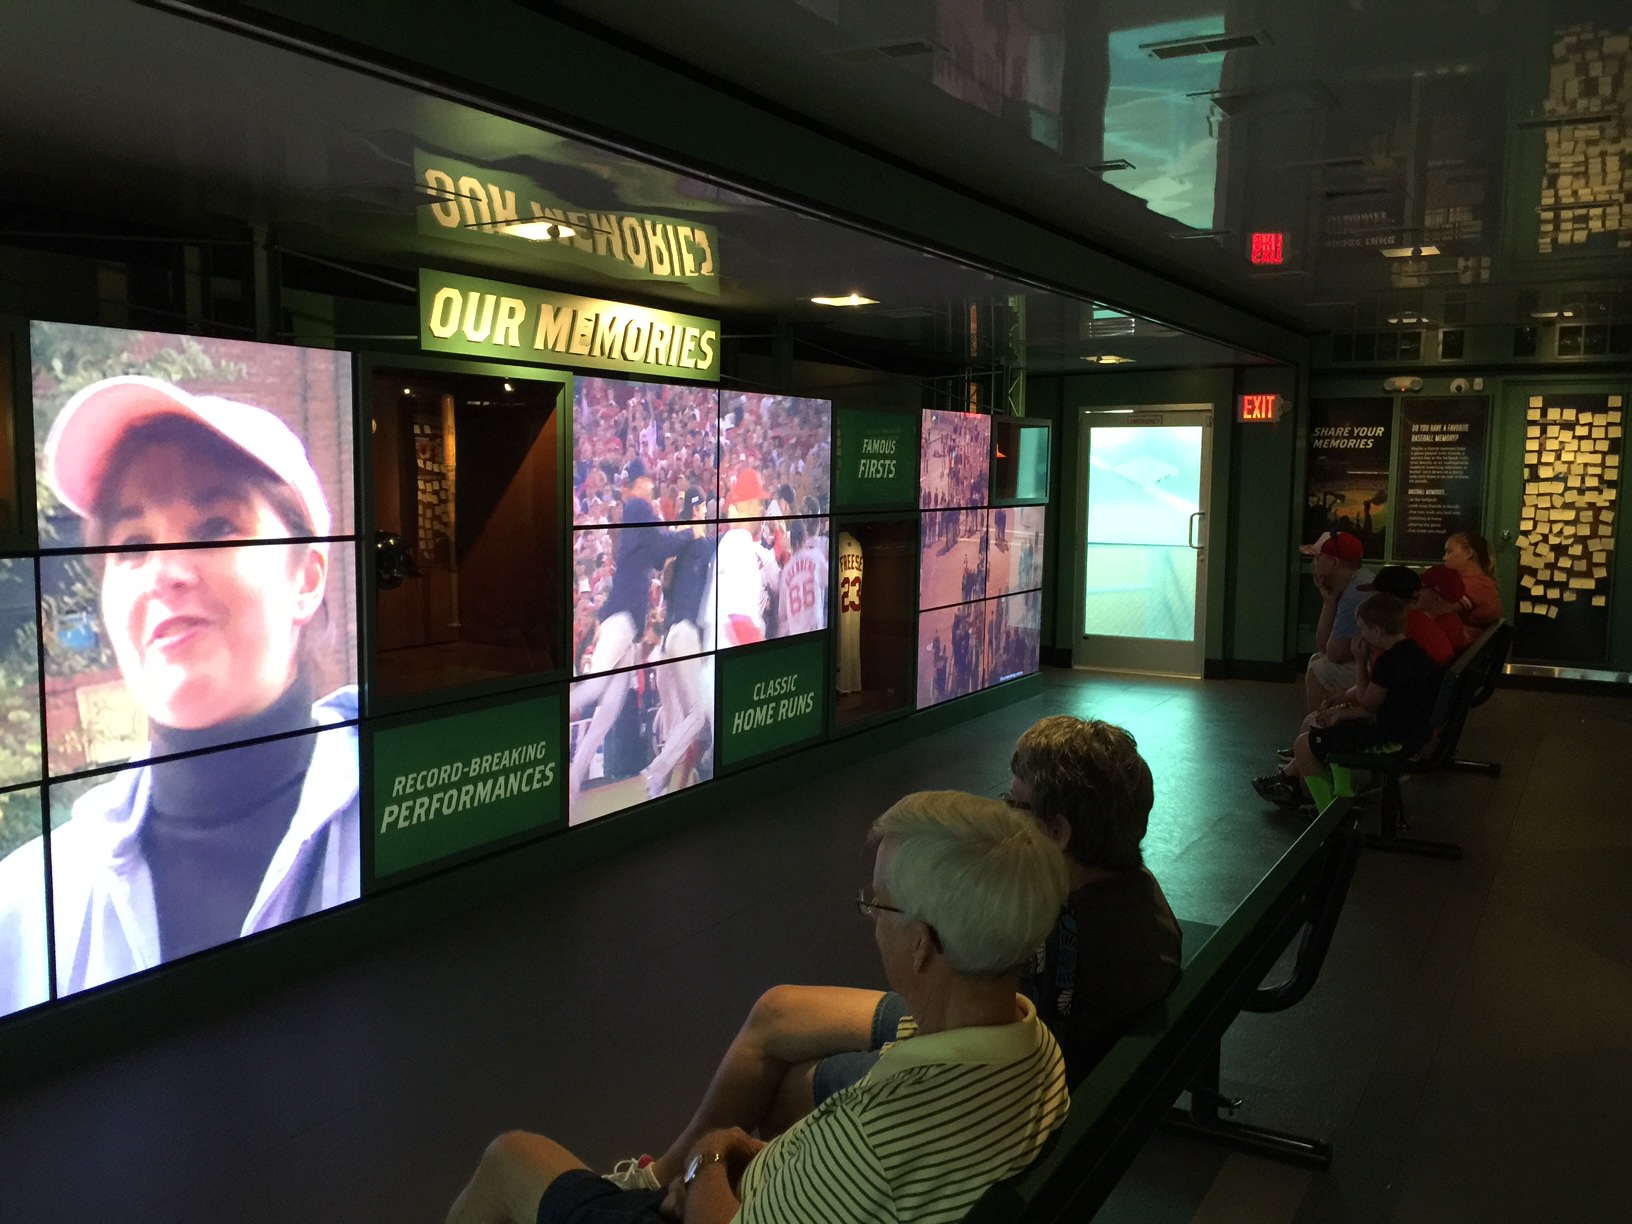 A number of interactive exhibits and films are available for viewing at the Hall of Fame exhibit in Davenport.